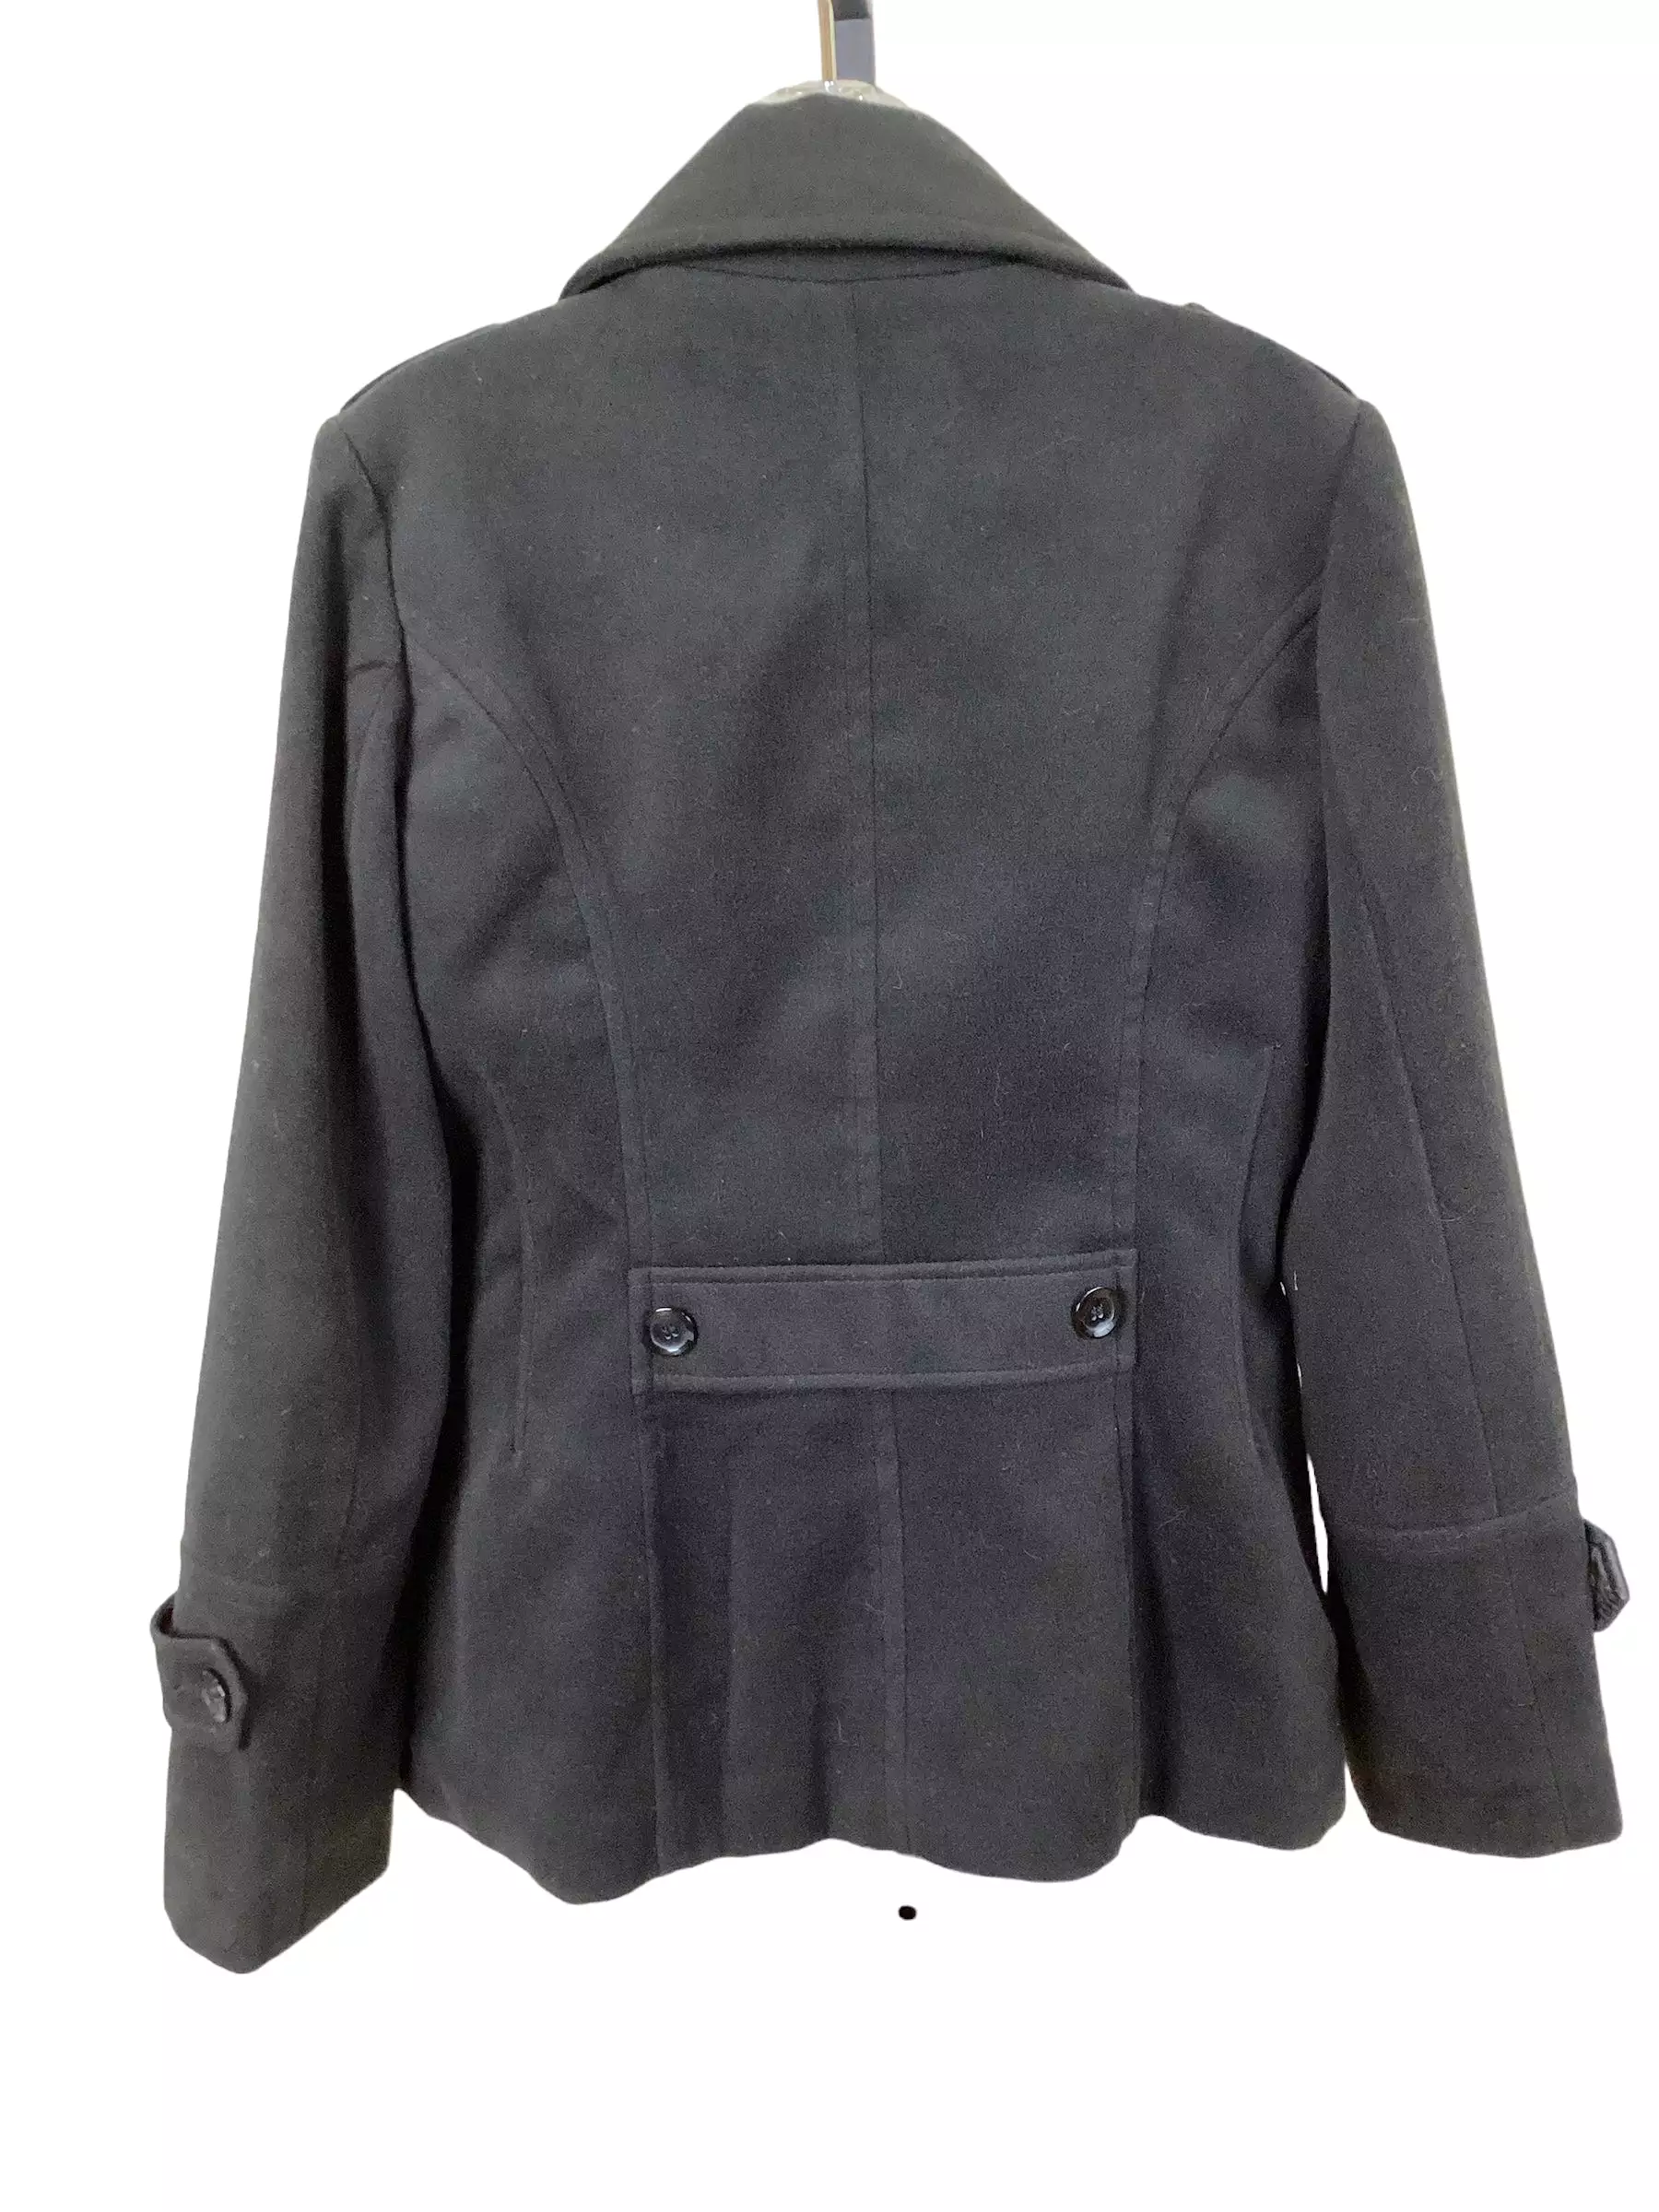 Coat Peacoat By Clothes Mentor  Size: S